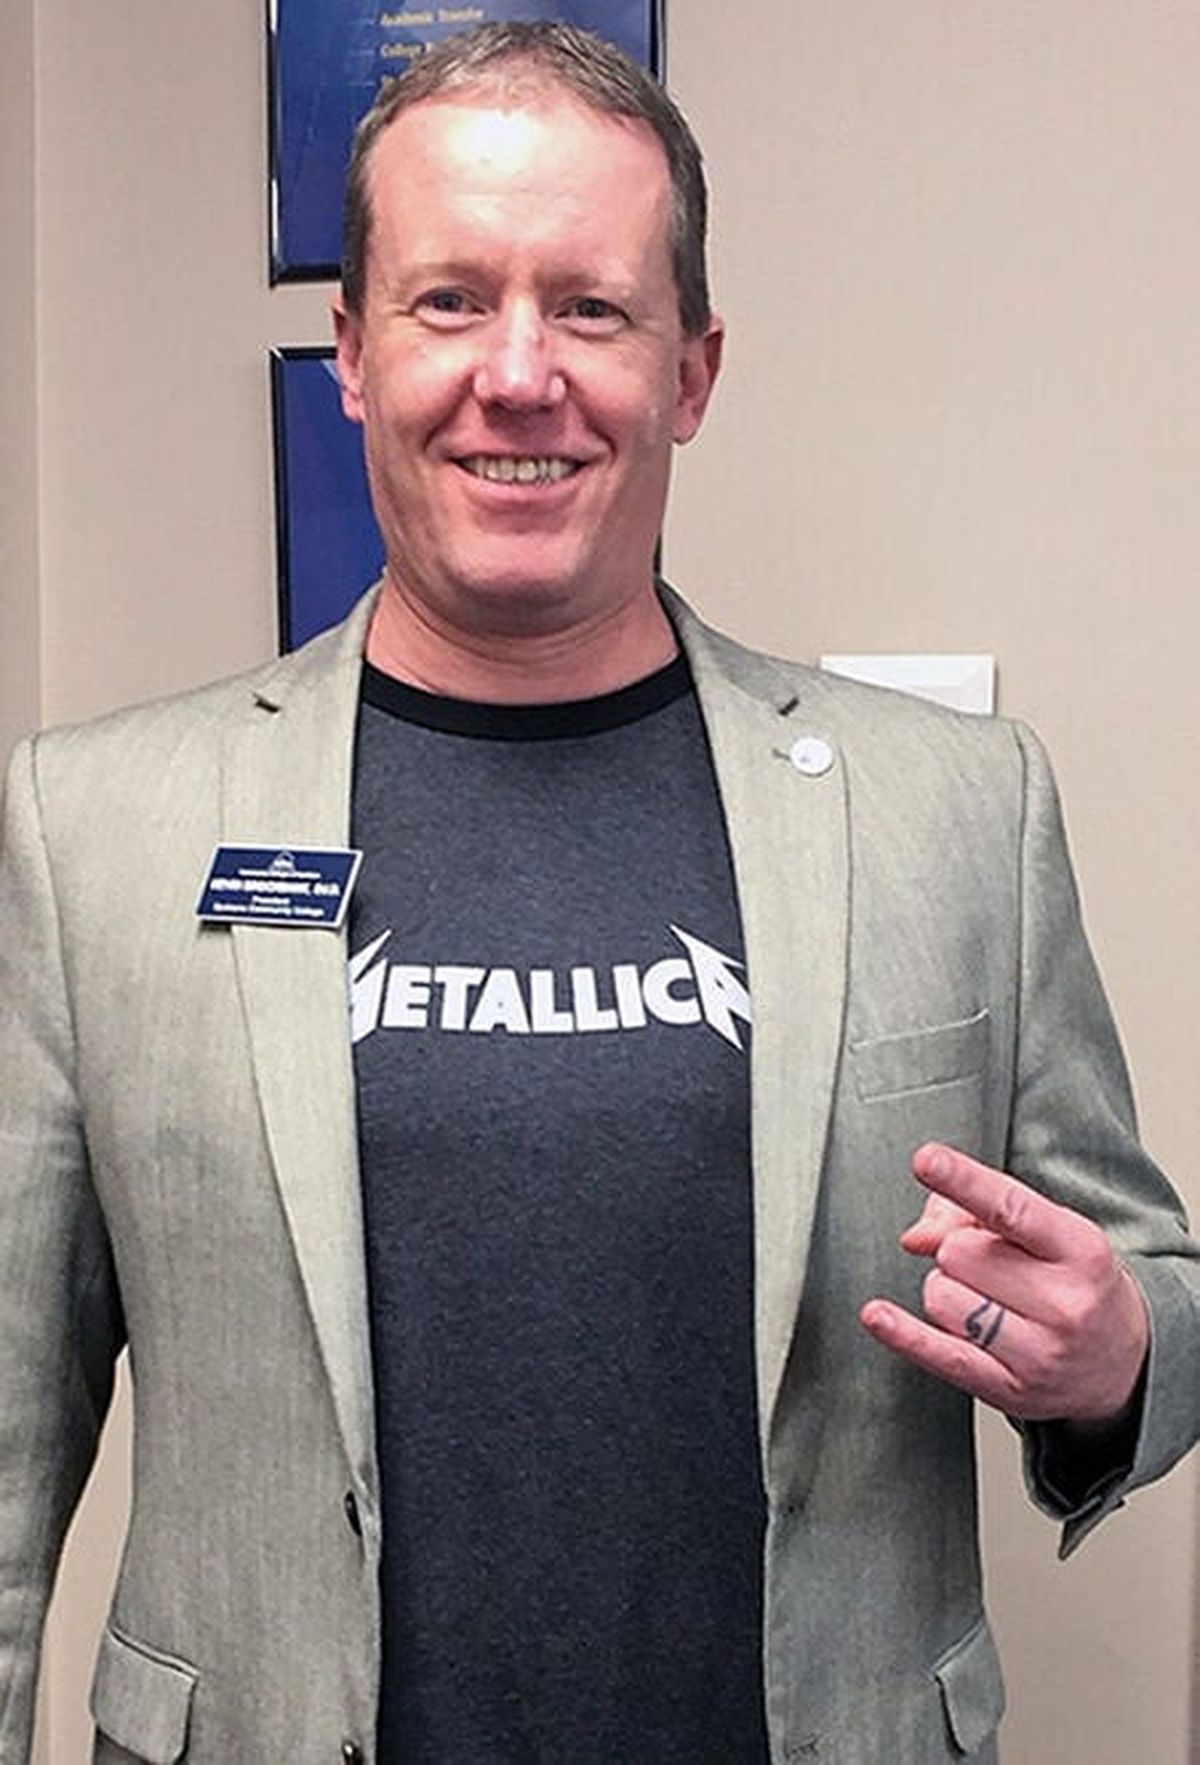 Then SCC Chancellor and Metallica fan Kevin Brockbank from 2019 when the college first received $100,000 from the band’s foundation.  (Courtesy Jeff Bunch)